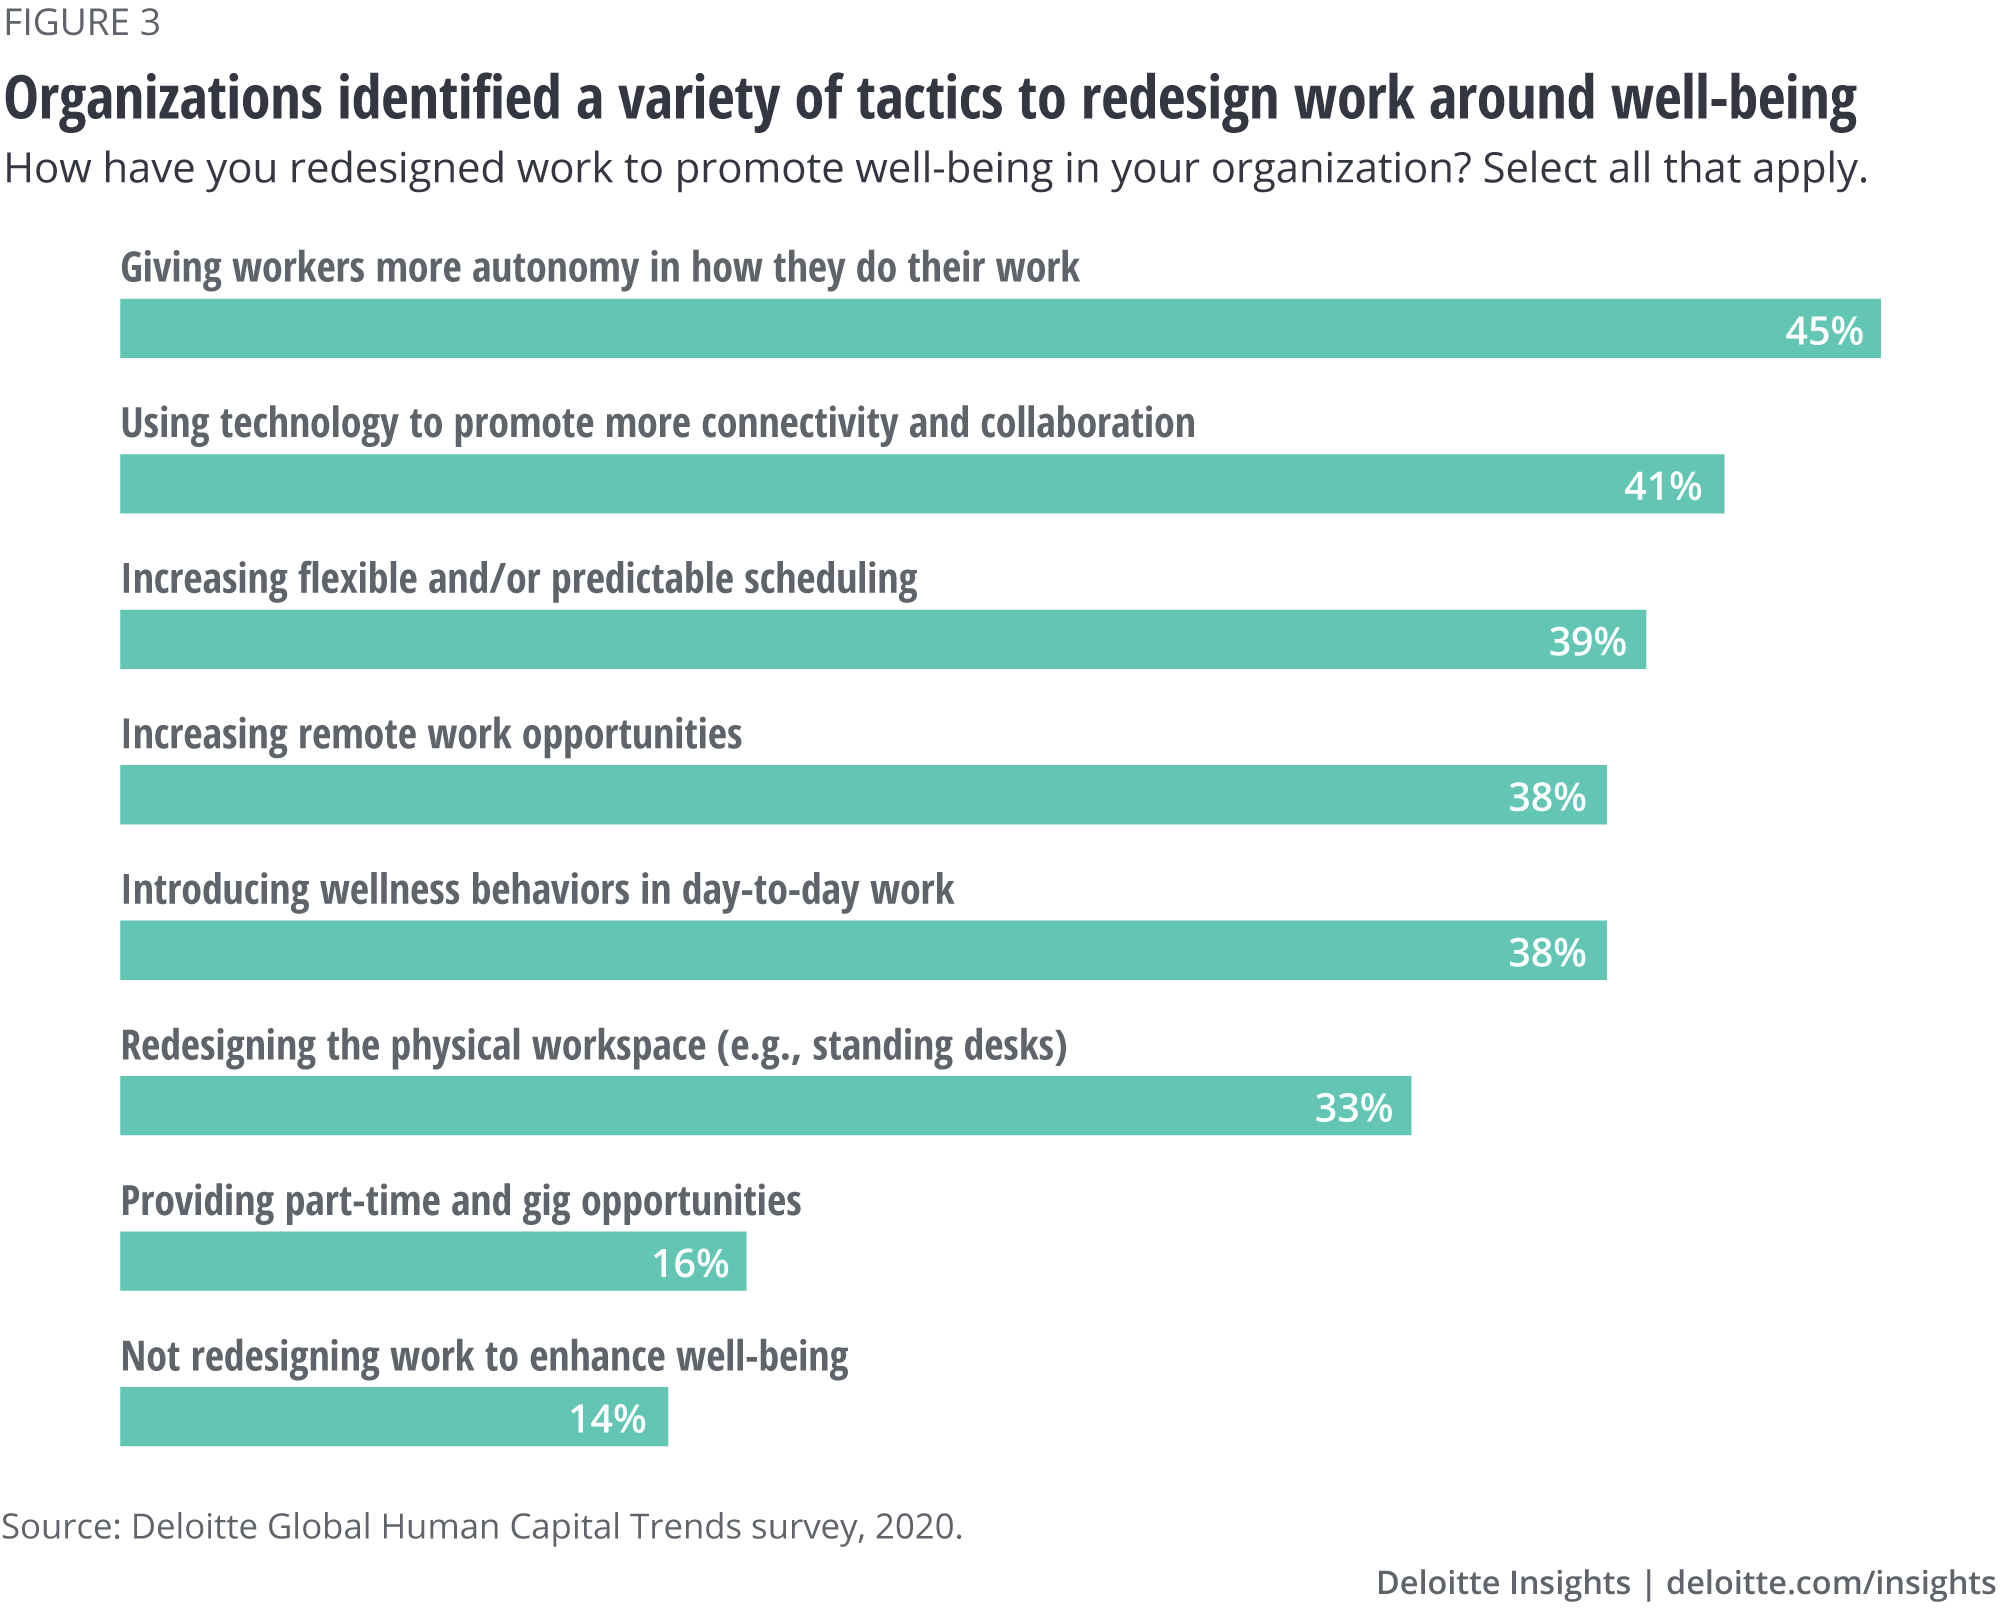 Organizations identified a variety of tactics to redesign work around well-being